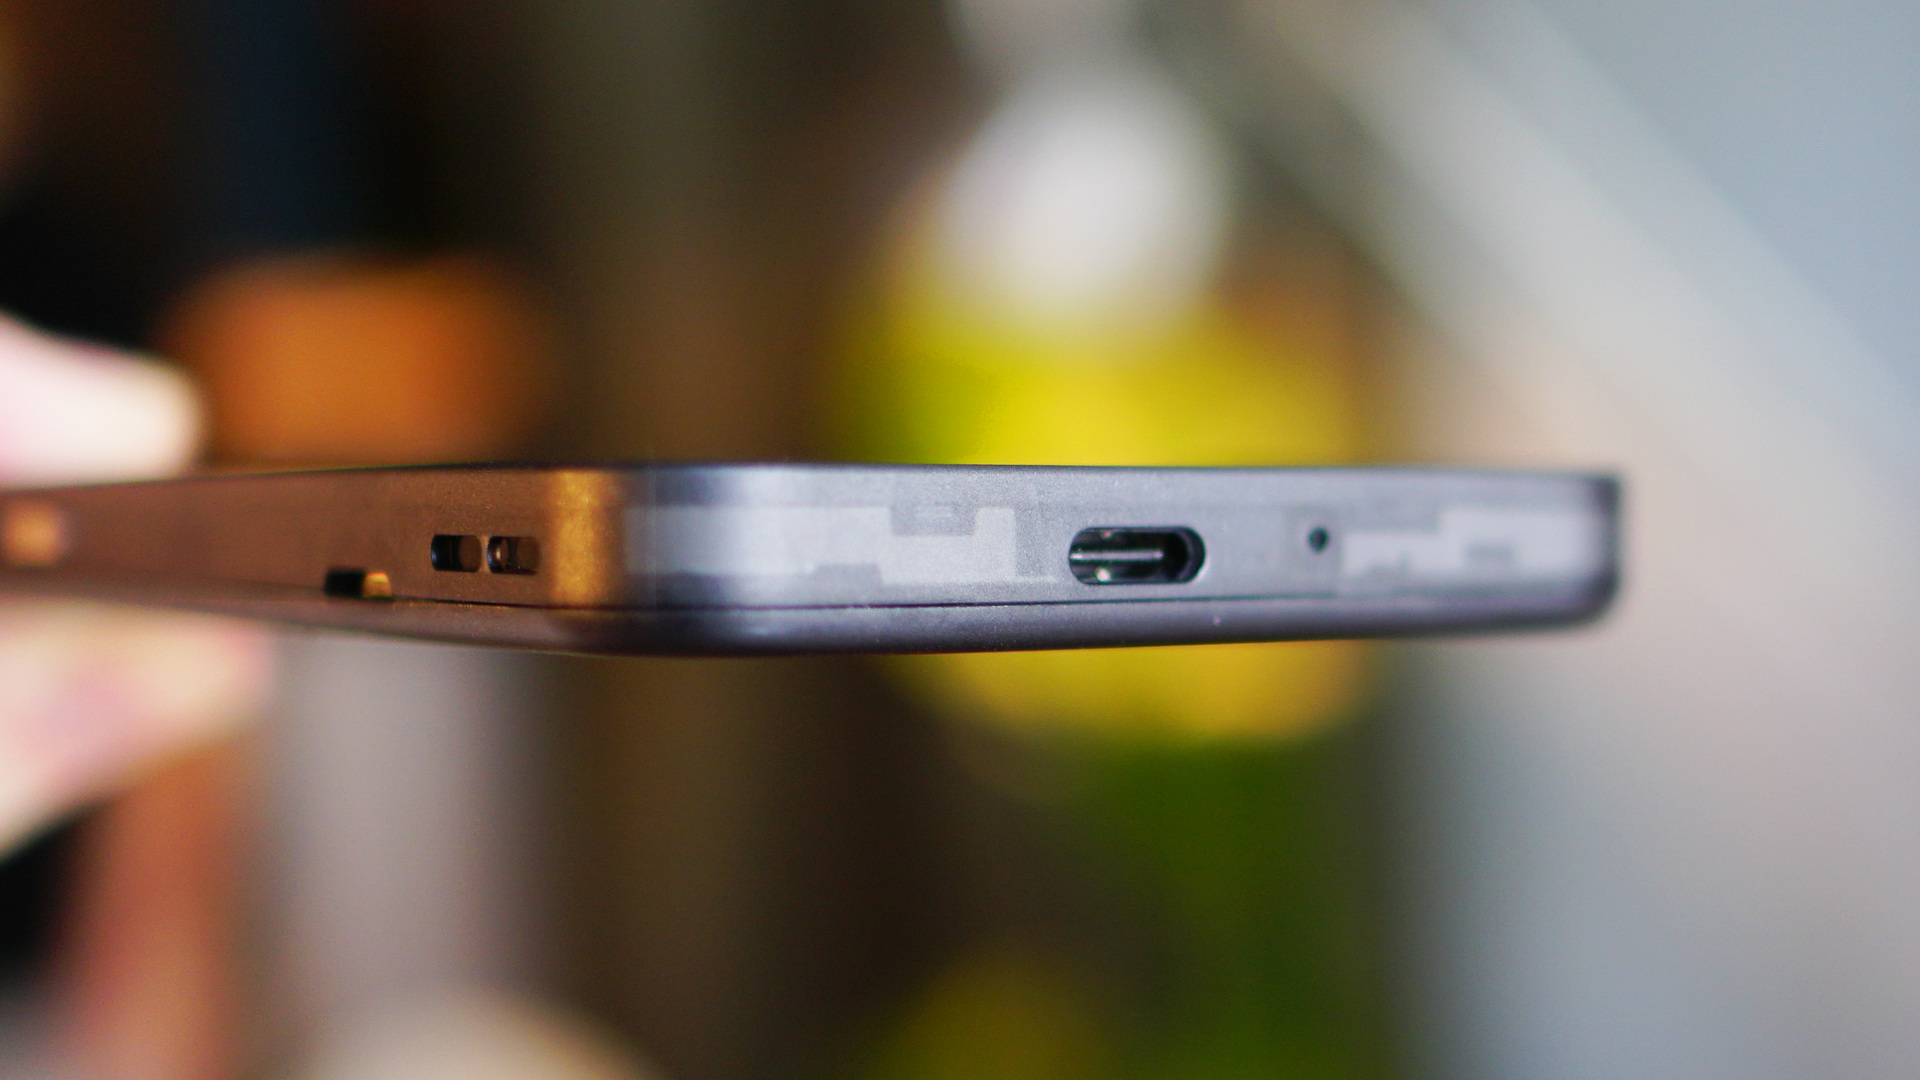 New devices with USB-C connectivity will require better USB-PD support.